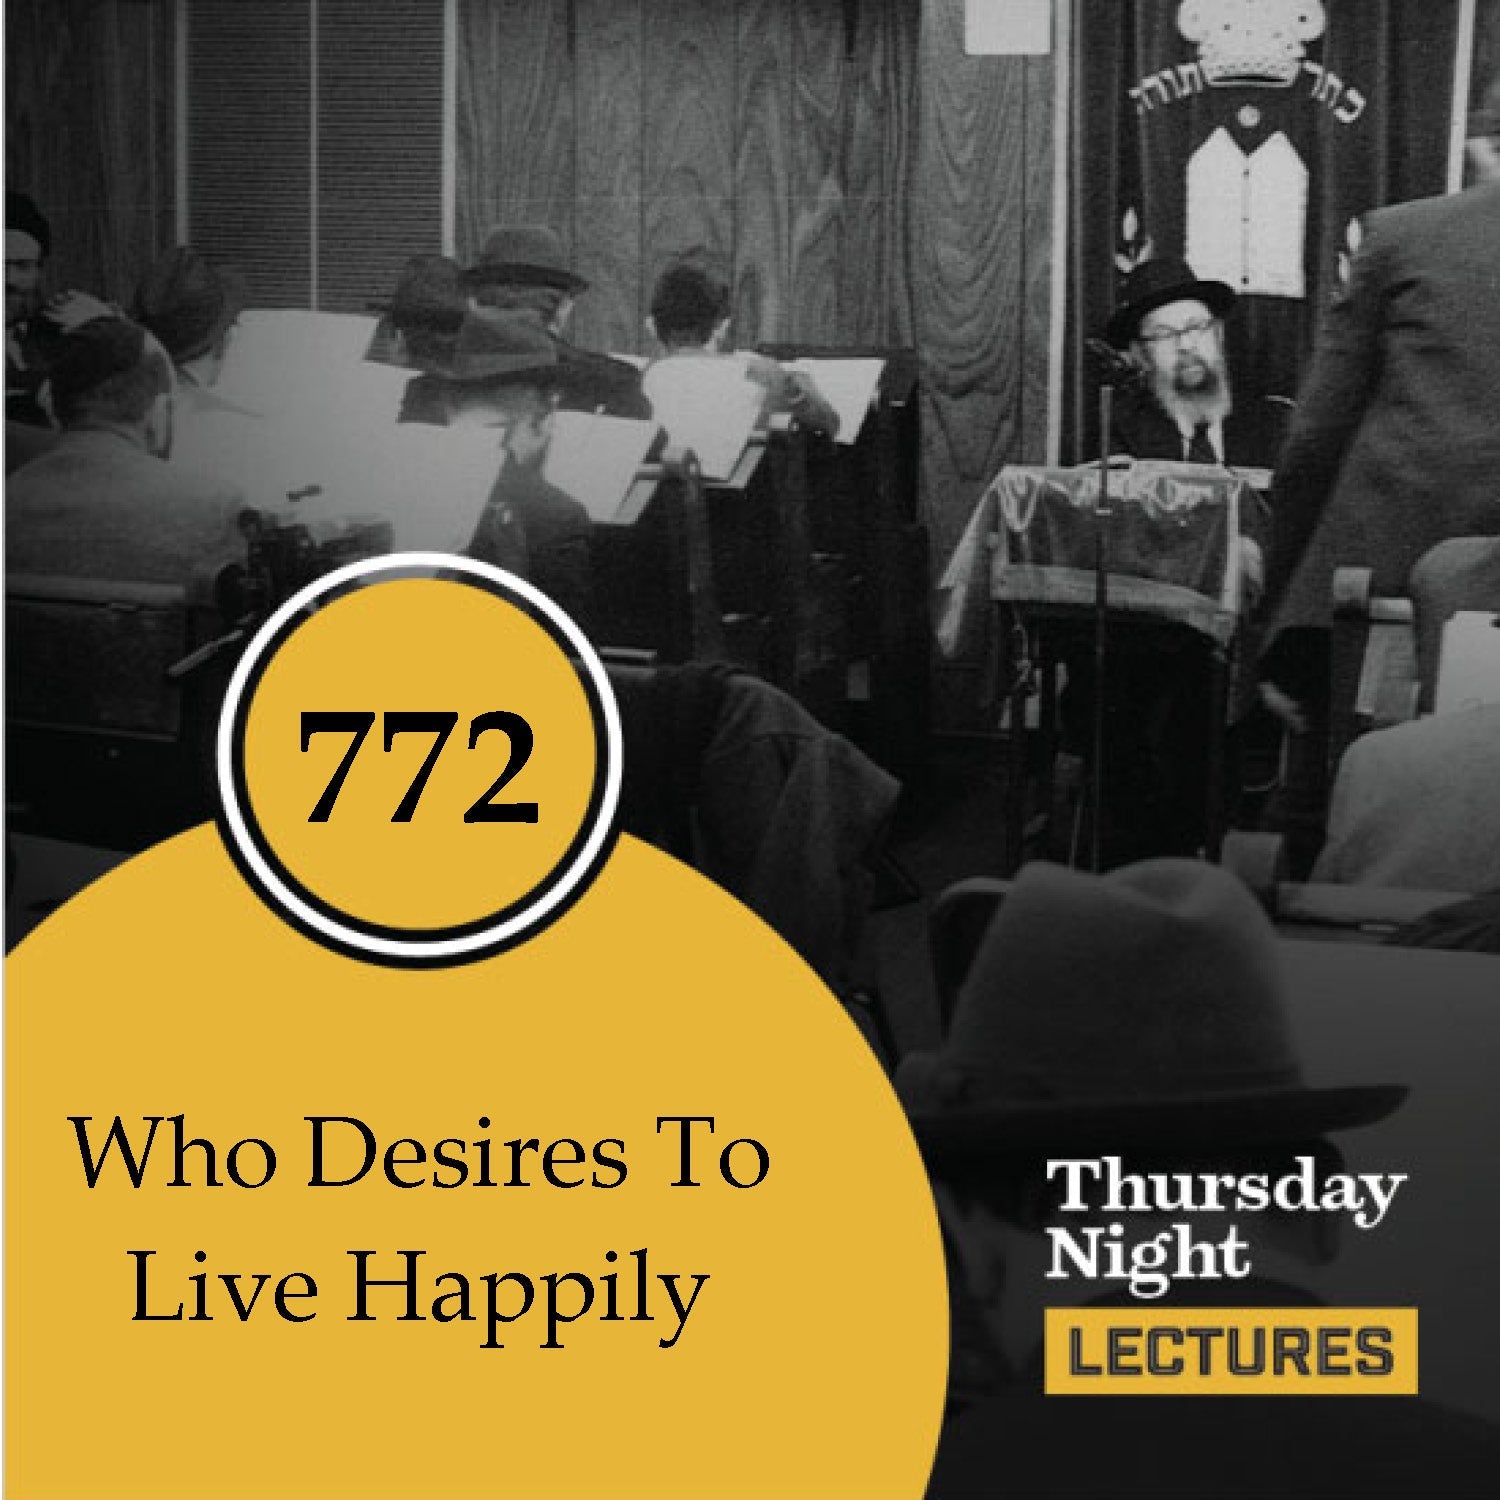 772 - Who Desires To Live Happily